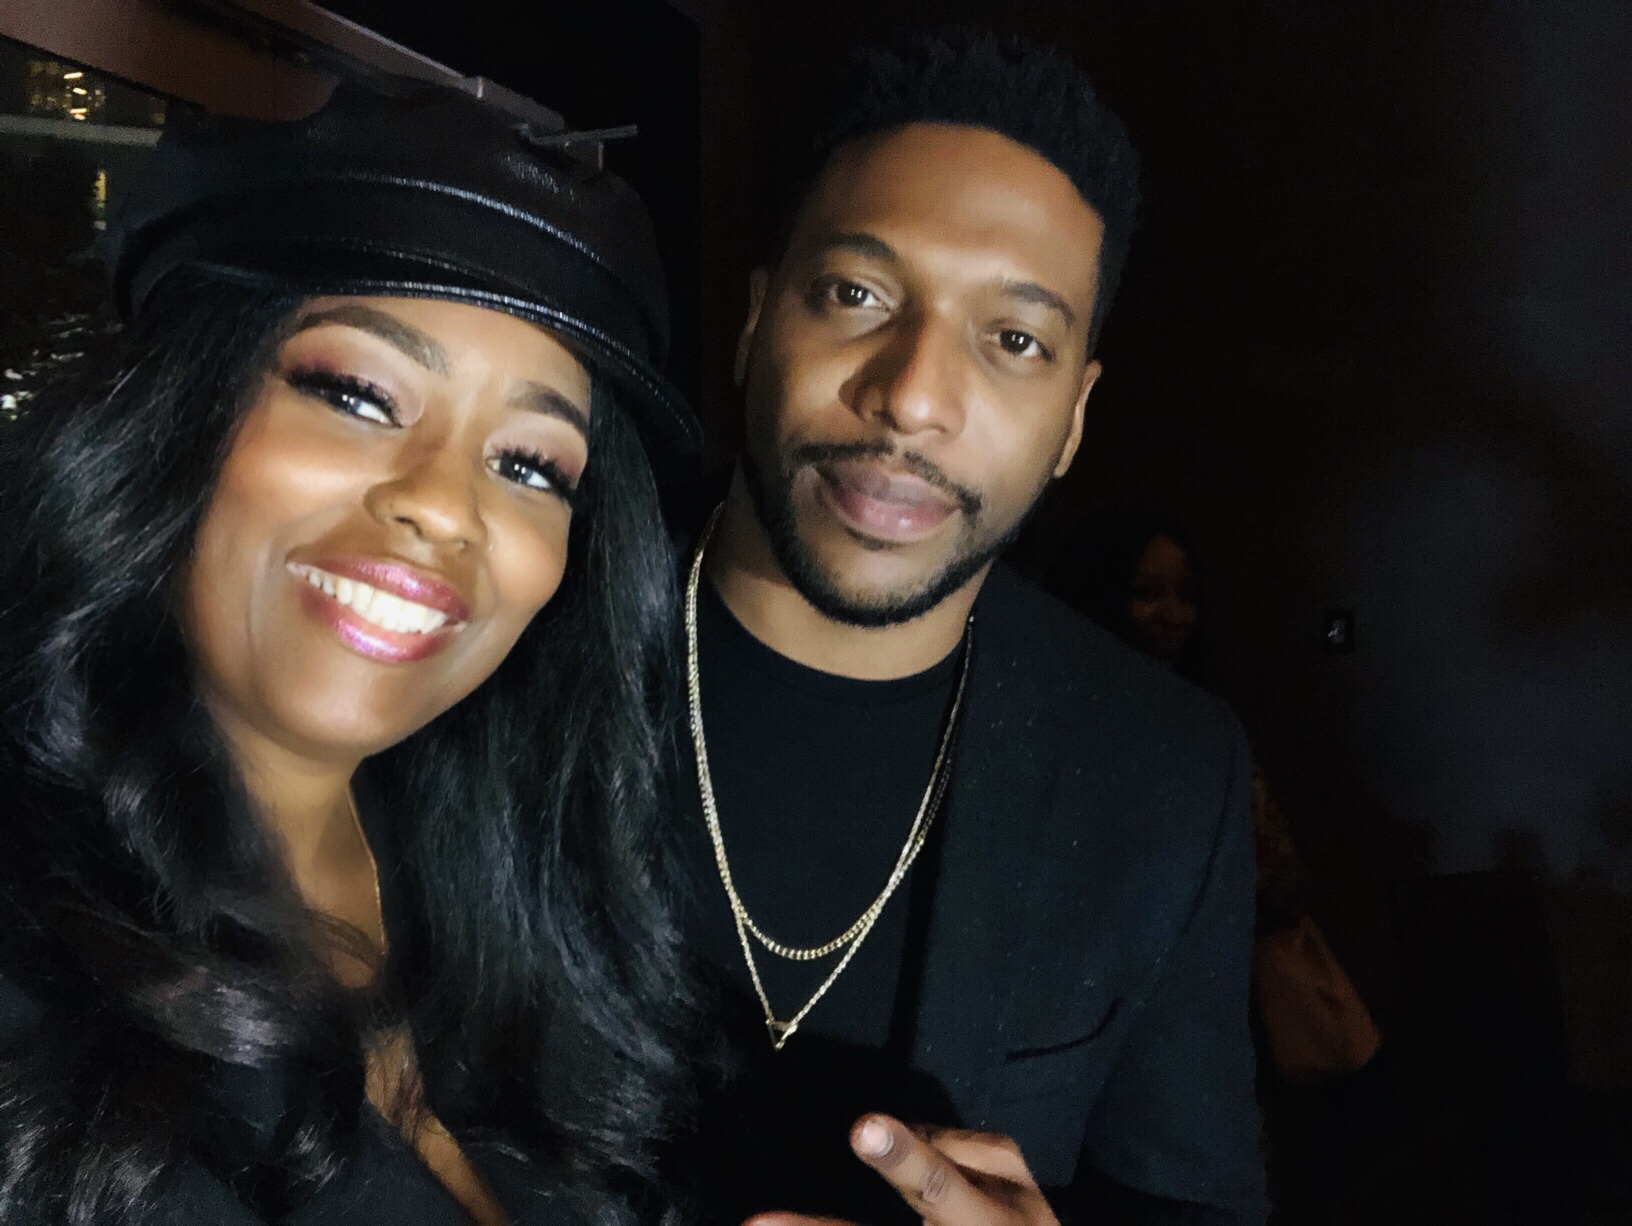 Dinner And A Conversation With Actor Jocko Sims From NBC’s New Amsterdam